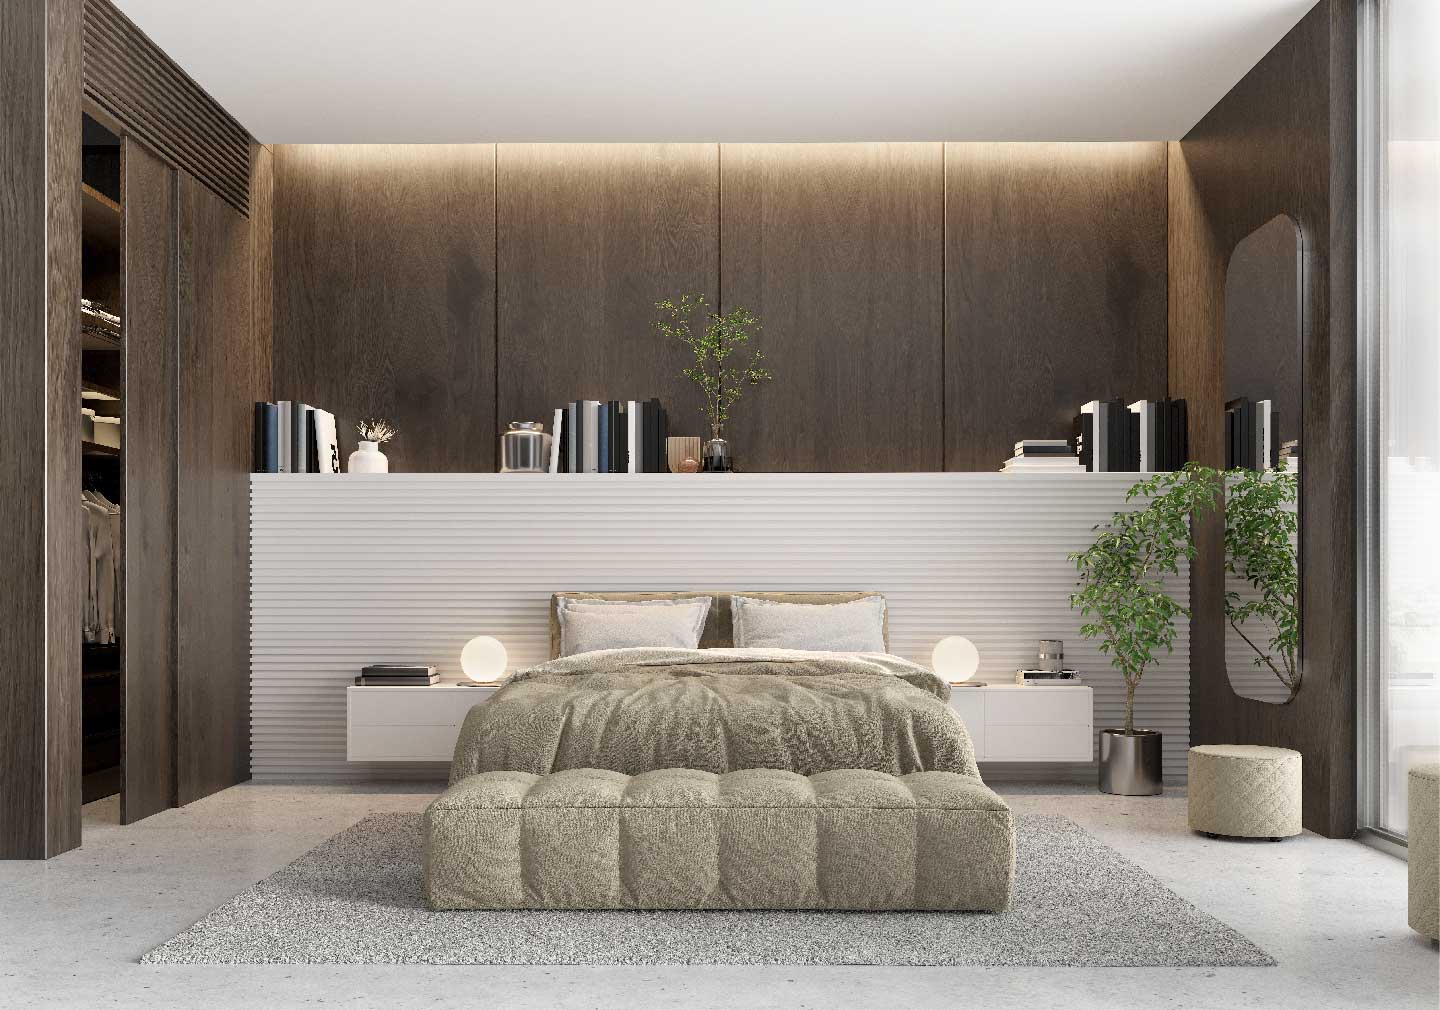 design tips to enhance your bedroom space